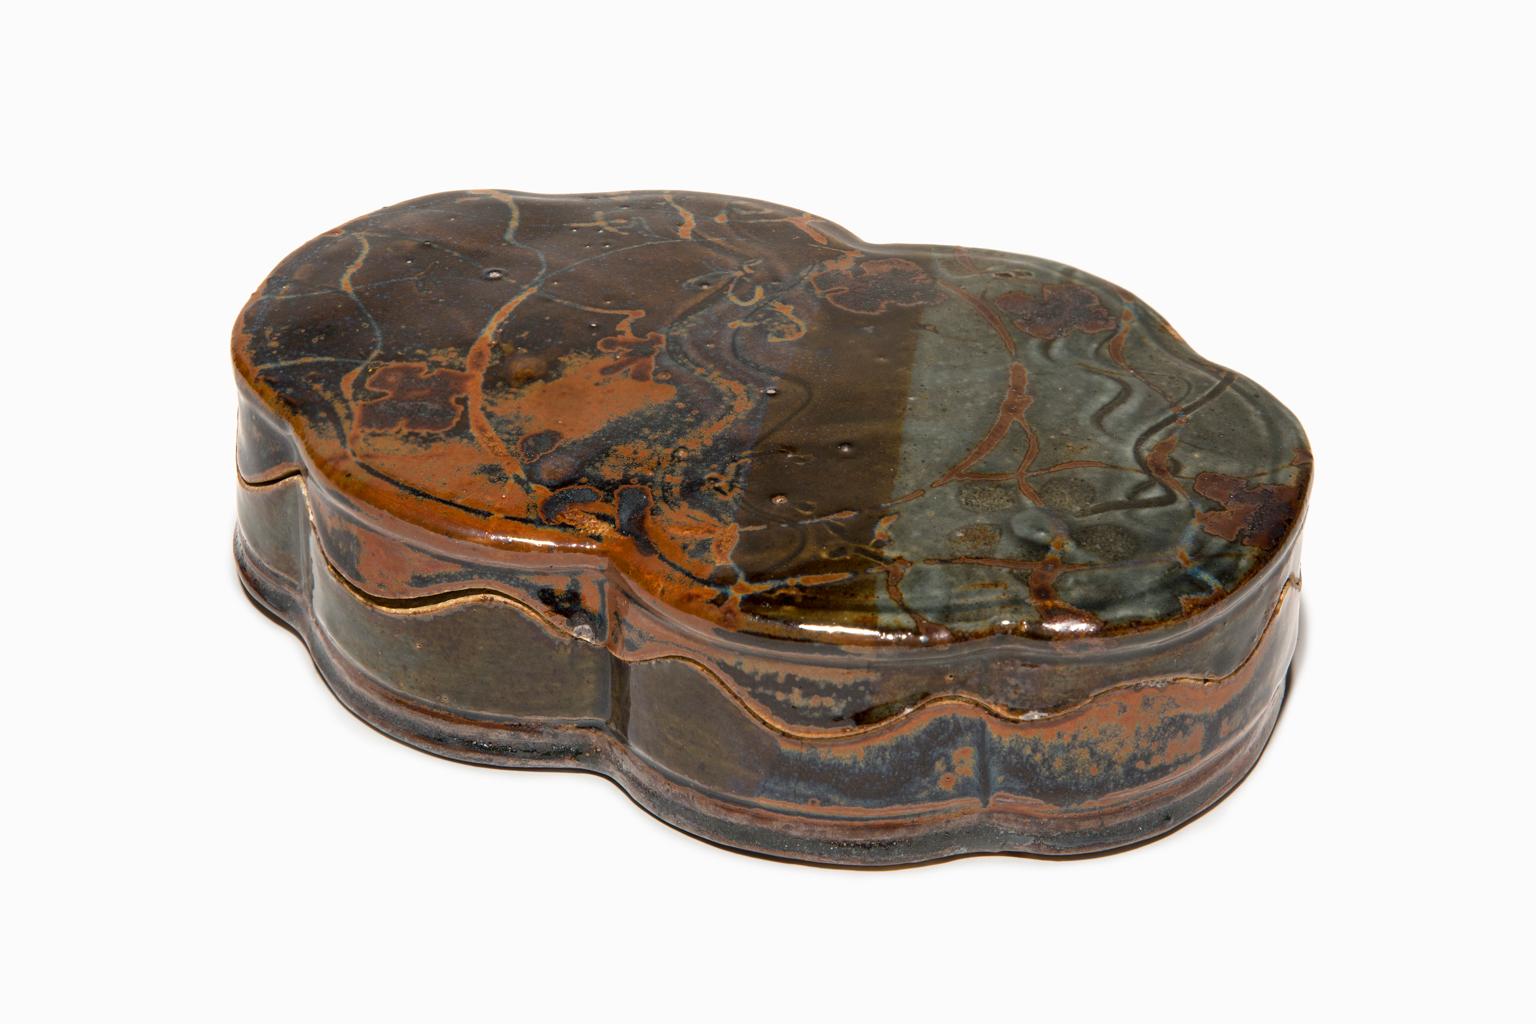 "Scalloped Box" is a stoneware piece with the decorative layer of the rich earth toned glazes and markings that John was so well-known for. He was, also, known for the undulating lip lines that fit together like a puzzle on his exquisite boxes. This